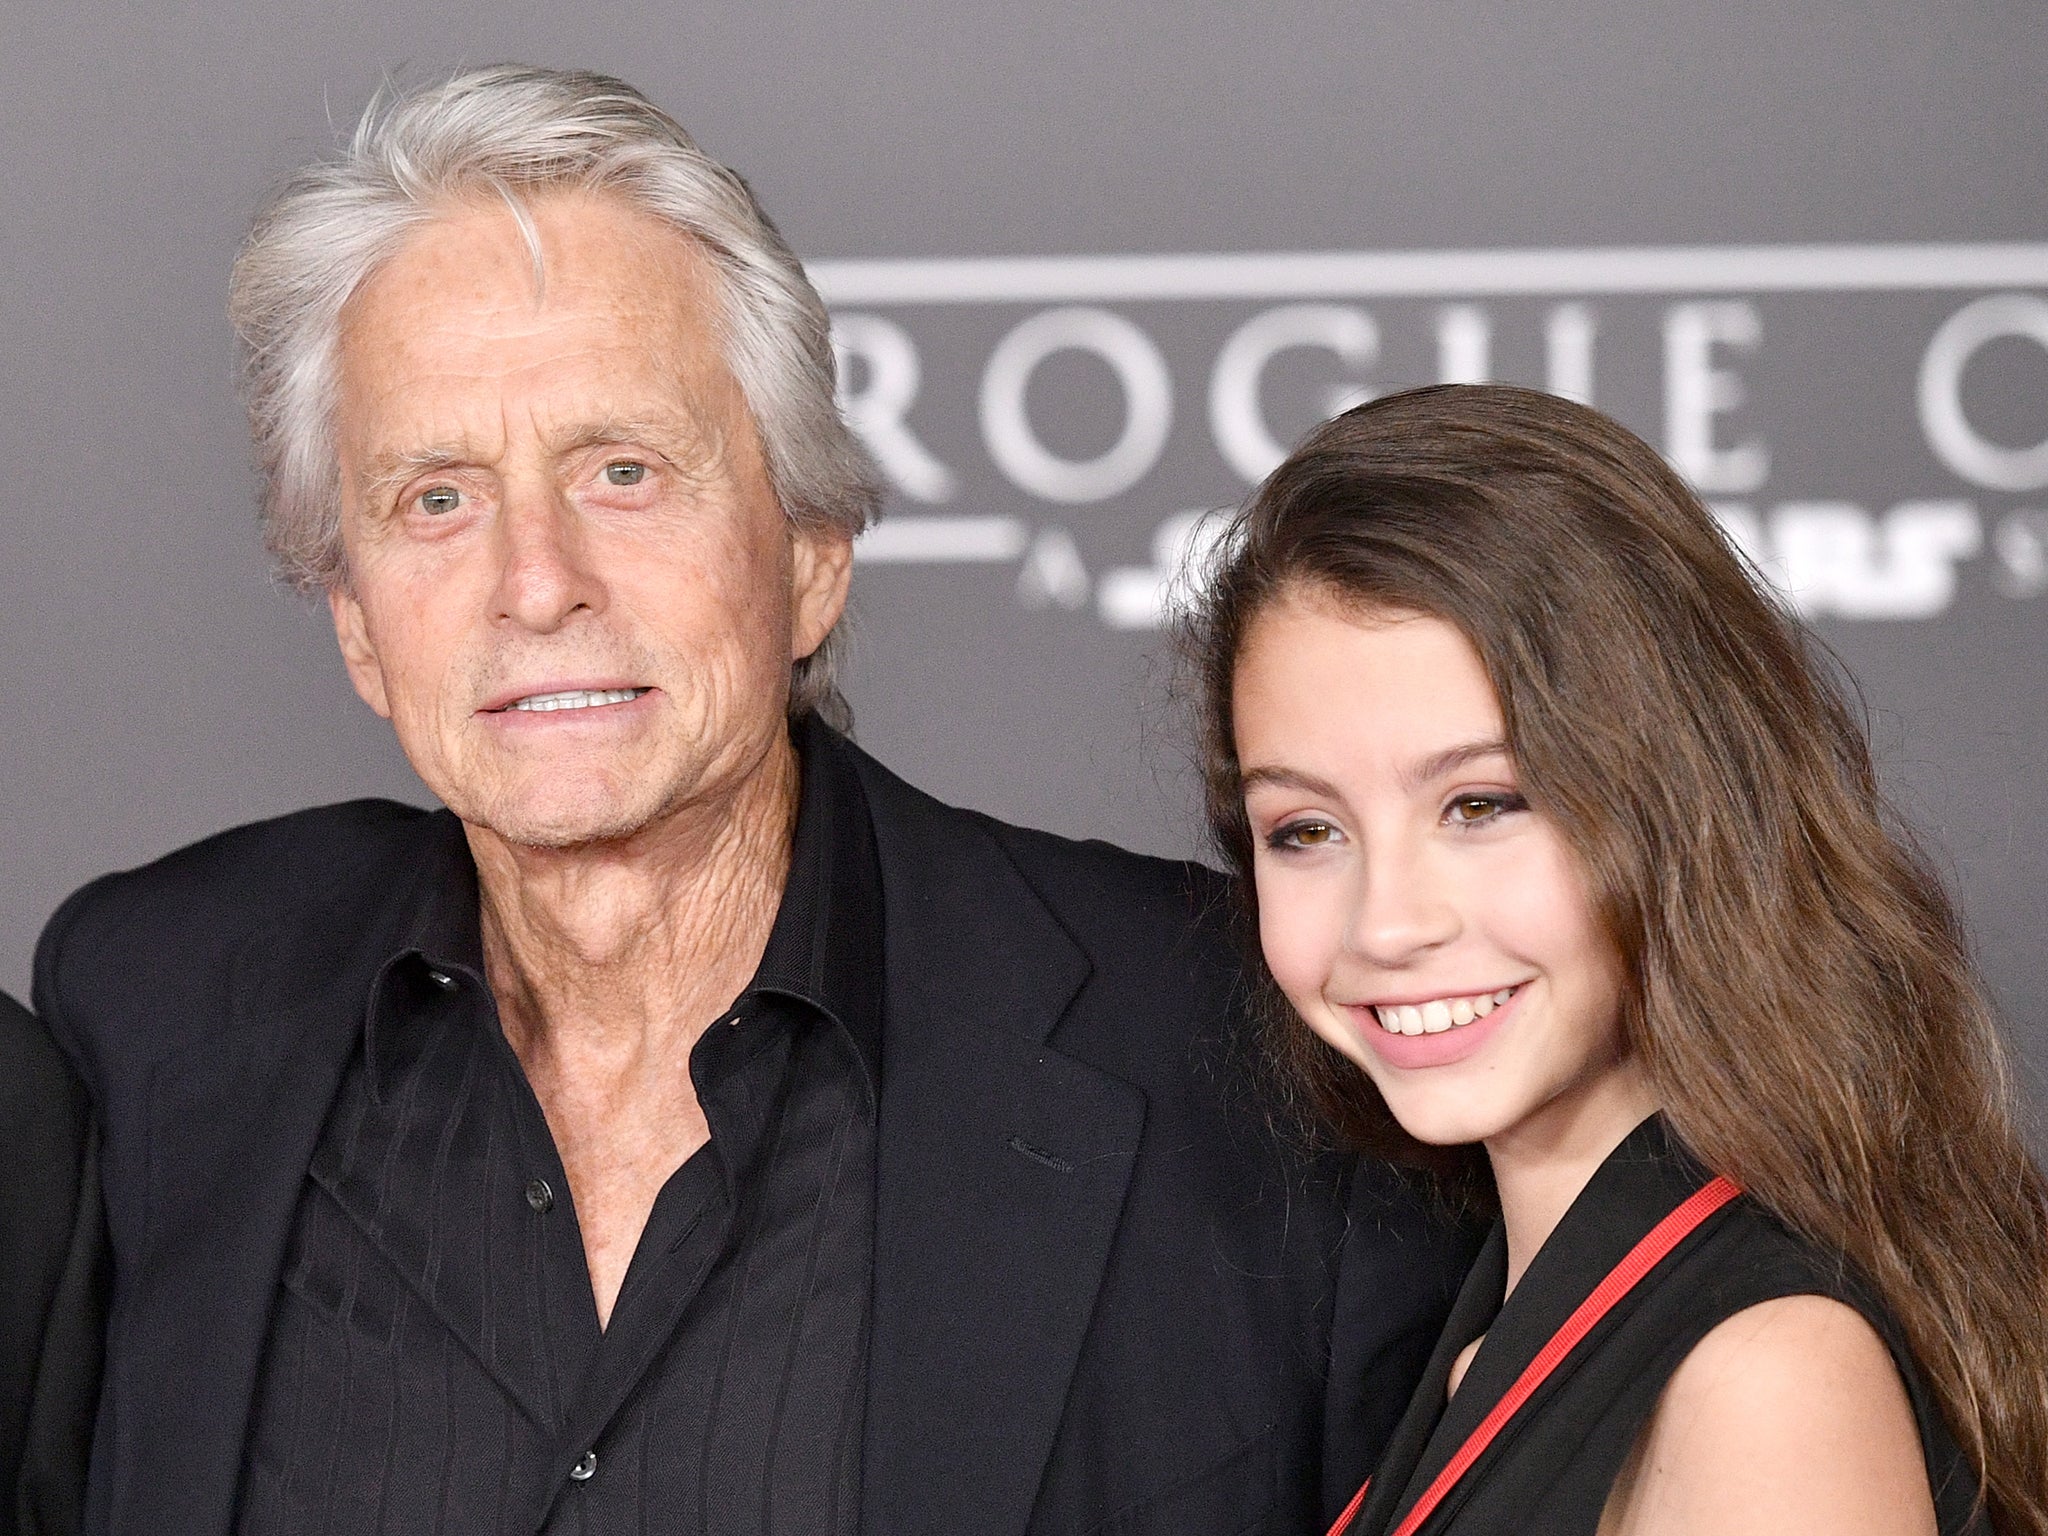 Michael Douglas, 76, was confused for 18-year-old daughters grandfather at her graduation The Independent